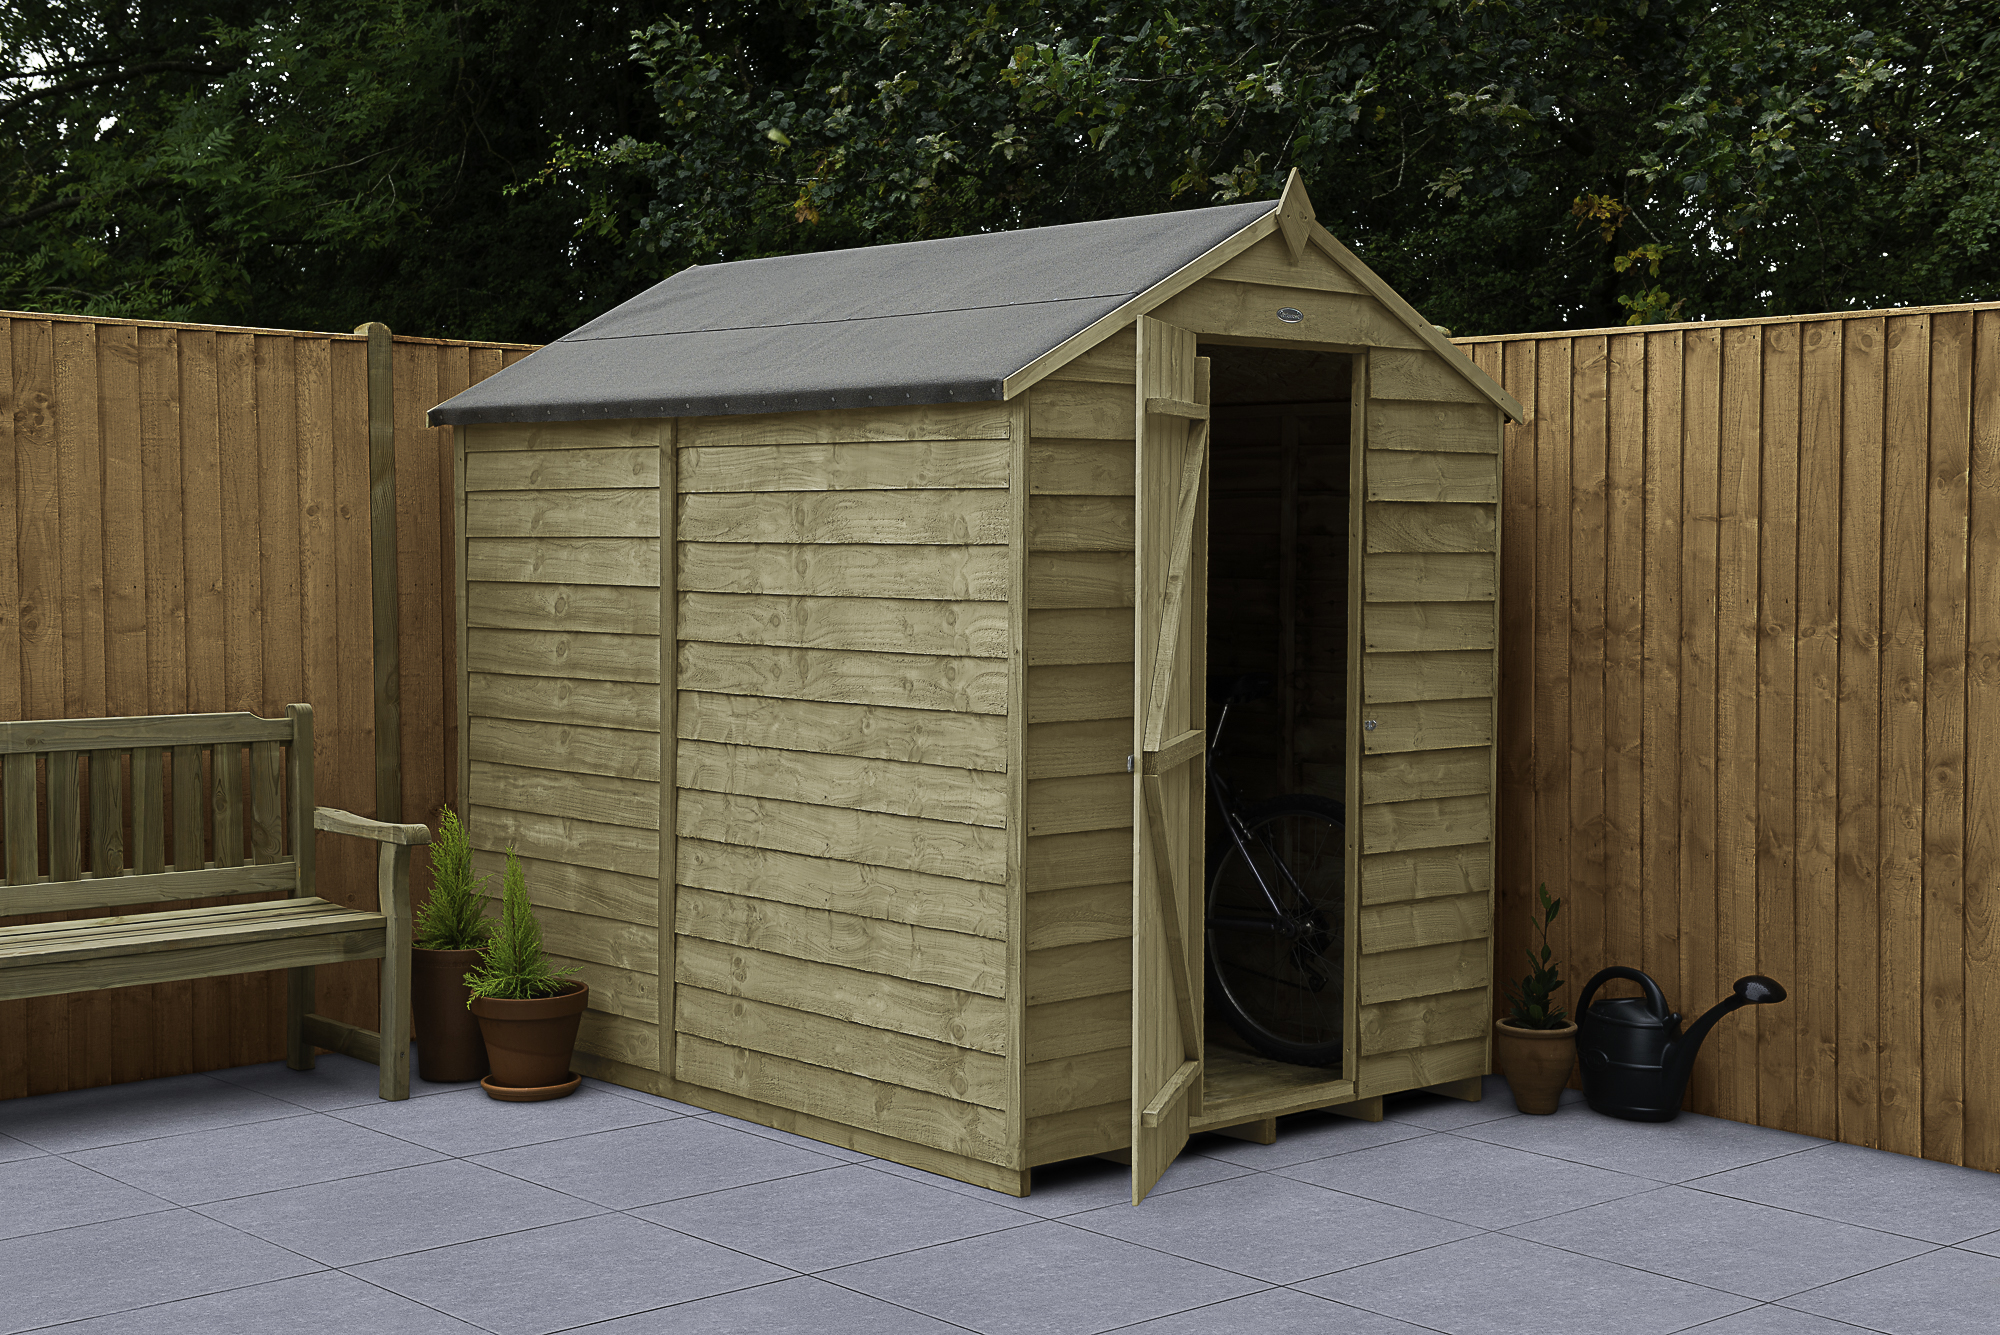 Image of Forest Garden 7 x 5 ft Apex Overlap Pressure Treated Windowless Shed